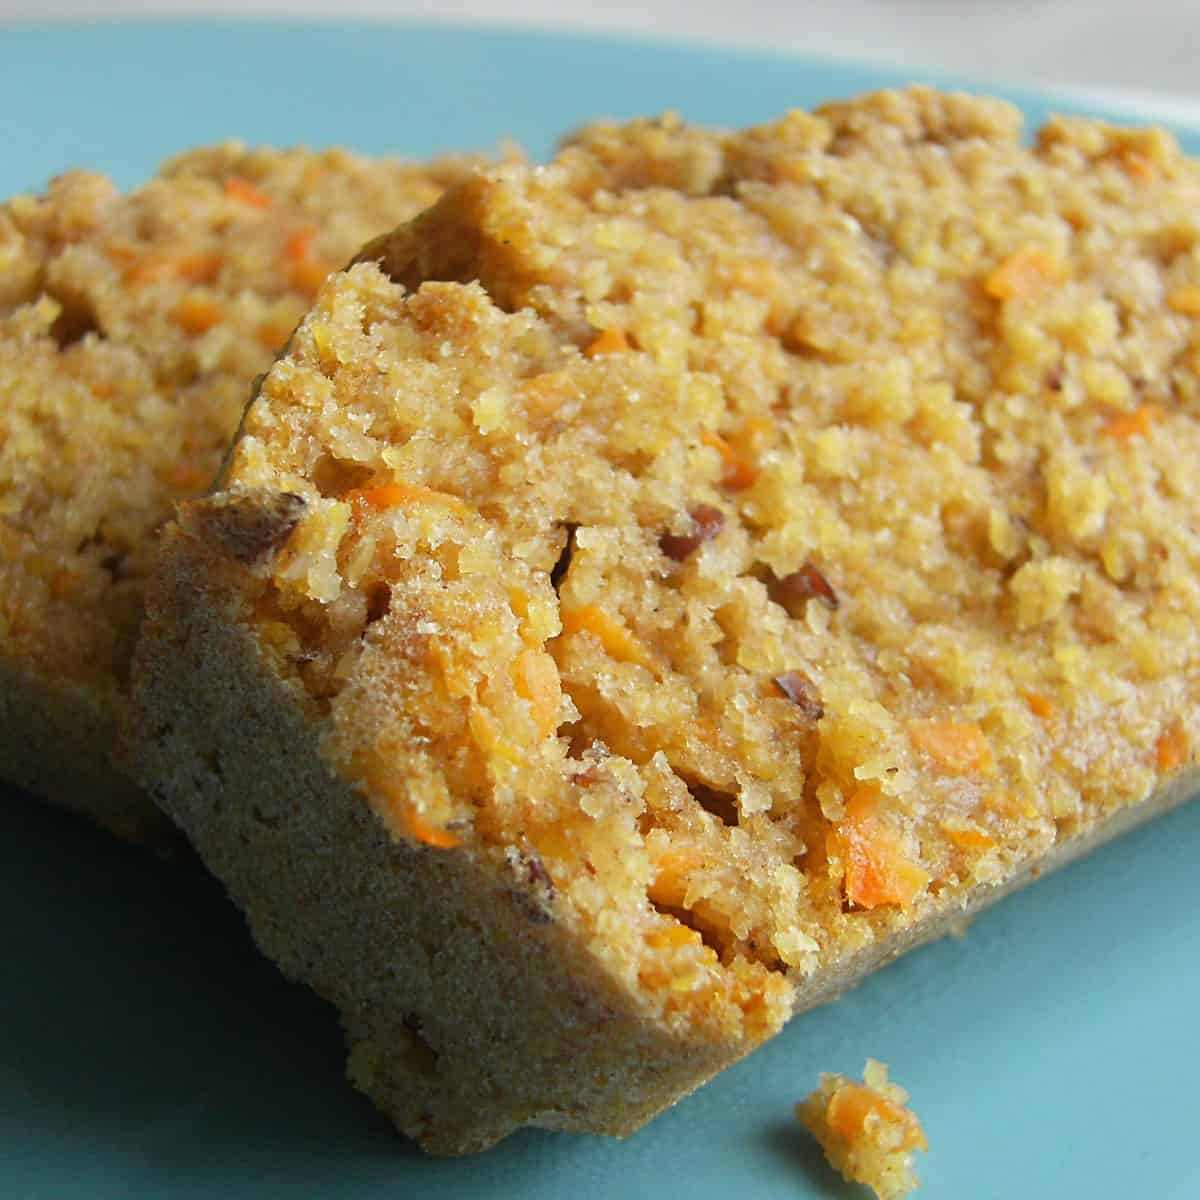 Delicious Carrot Cornbread Recipe for Your Next Meal!